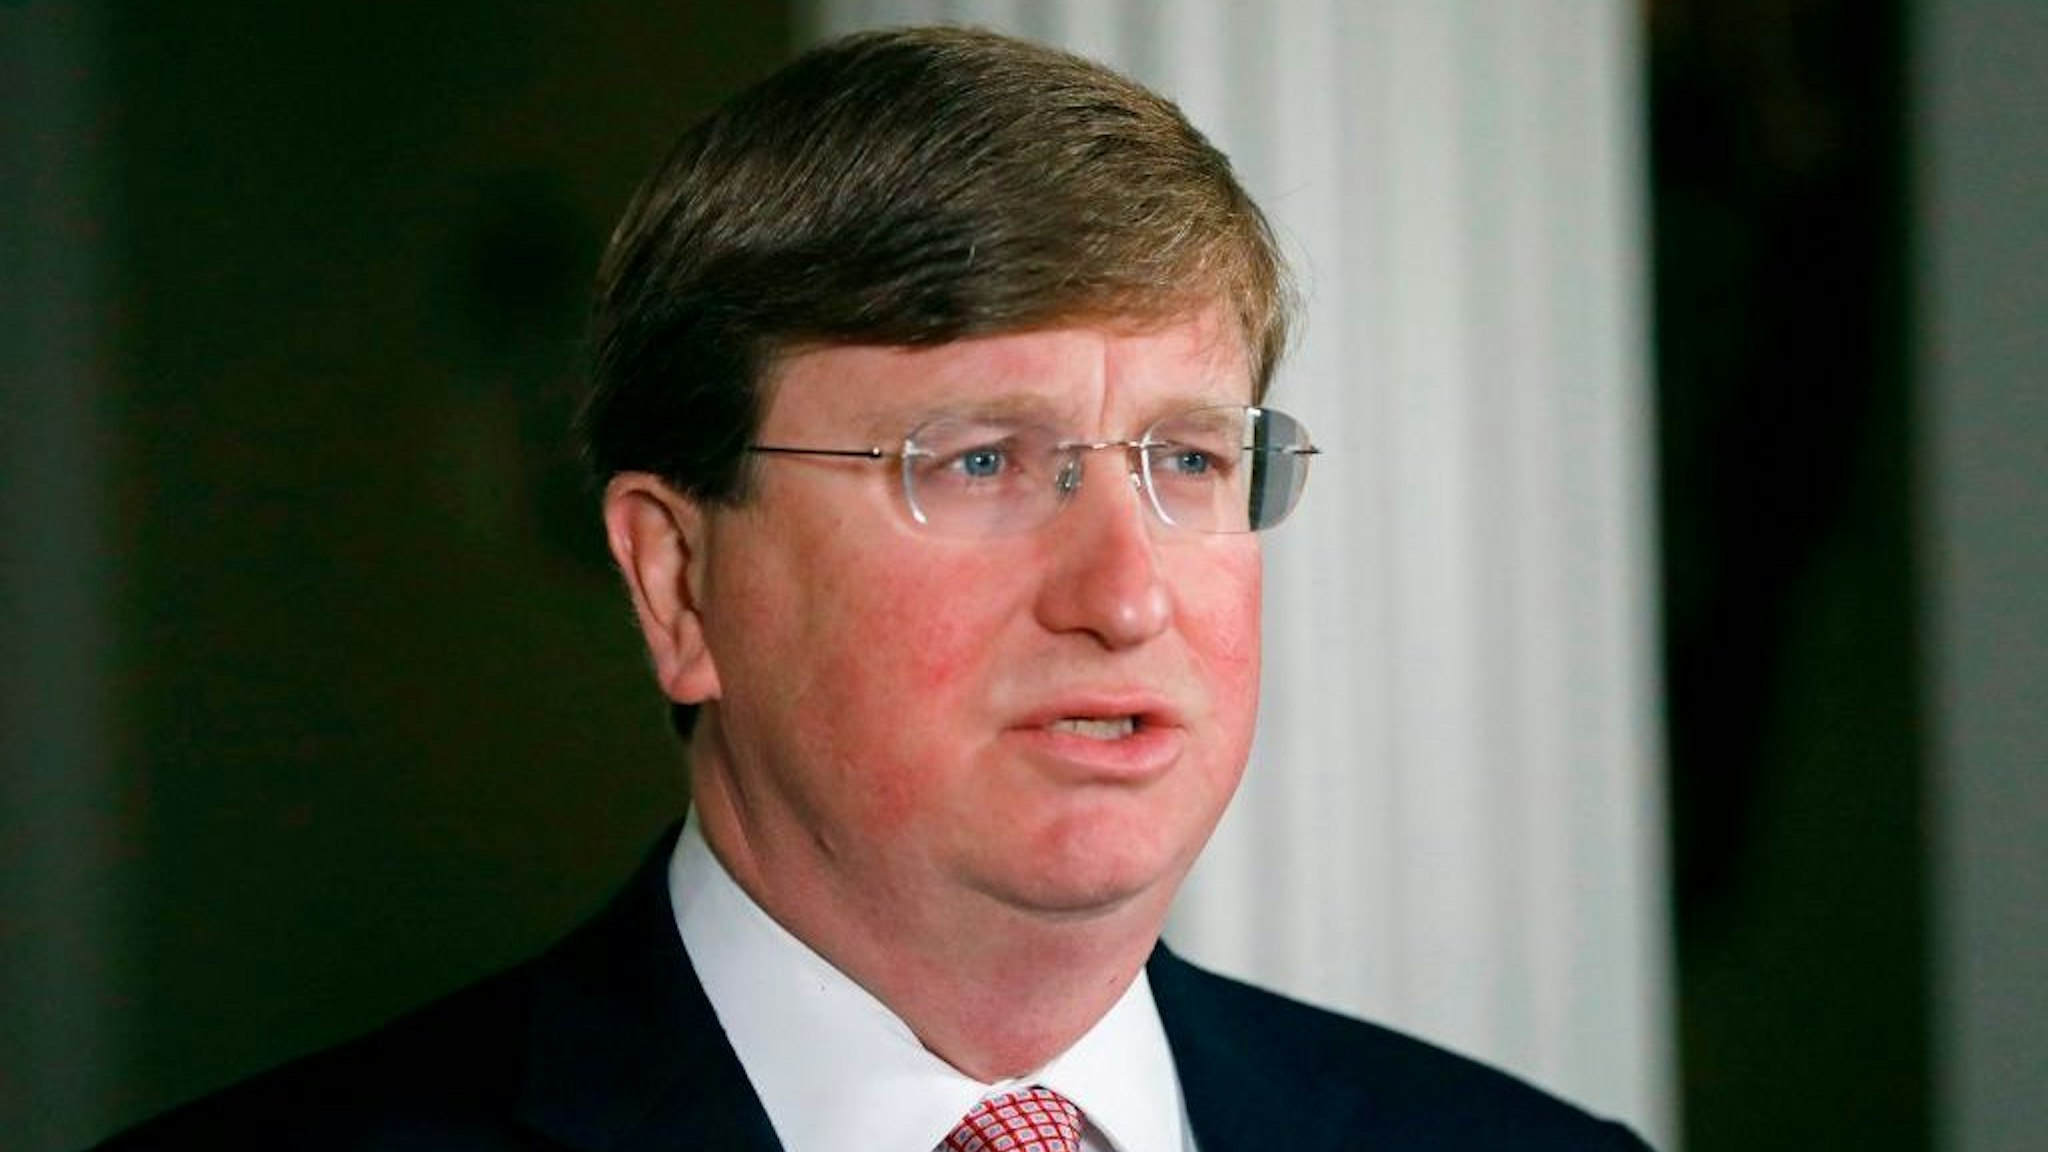 Mississippi Republican Gov. Tate Reeves delivers a televised address prior to signing a bill retiring the last state flag with the Confederate battle emblem during a ceremony at the Governor's Mansion in Jackson, Mississippi, on June 30, 2020. (Photo by ROGELIO V. SOLIS/POOL/AFP via Getty Images)